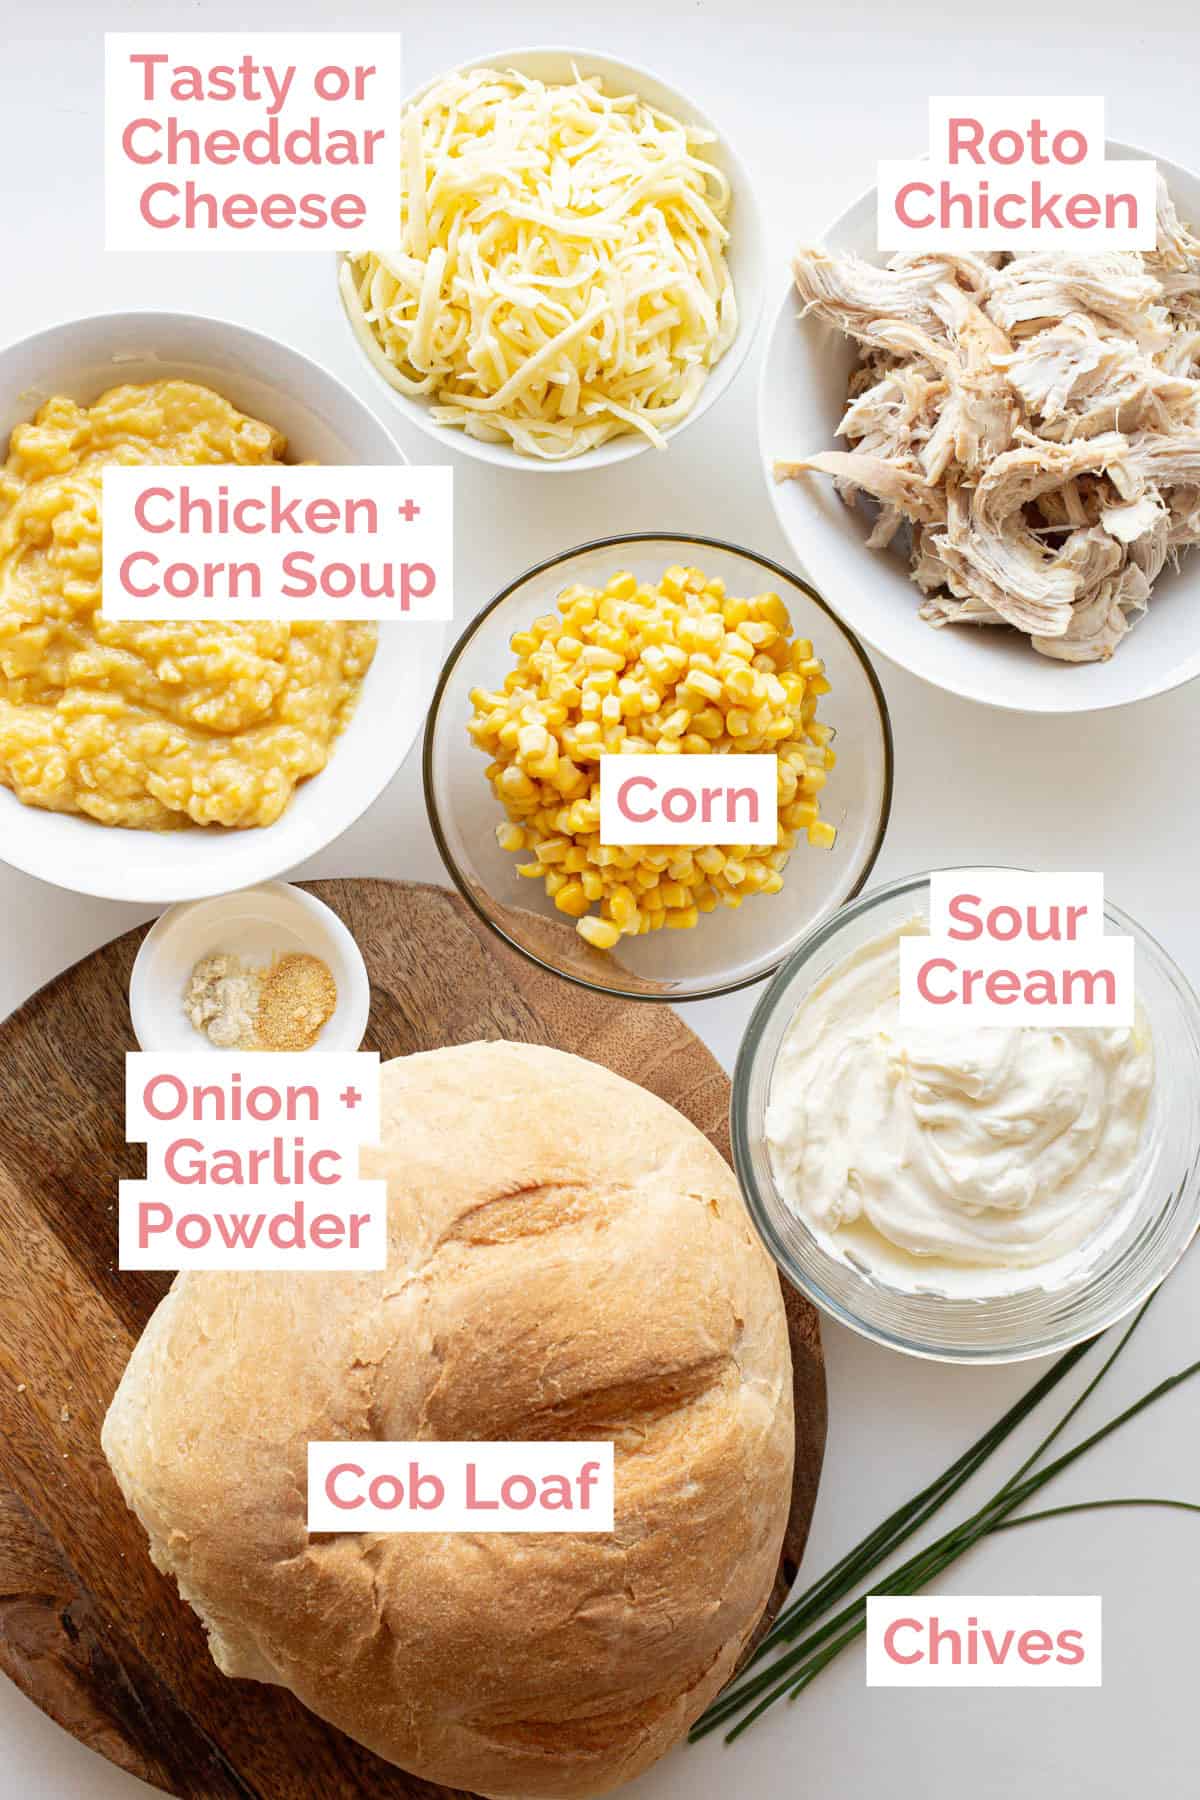 Ingredients laid out to make chicken and corn cob loaf.